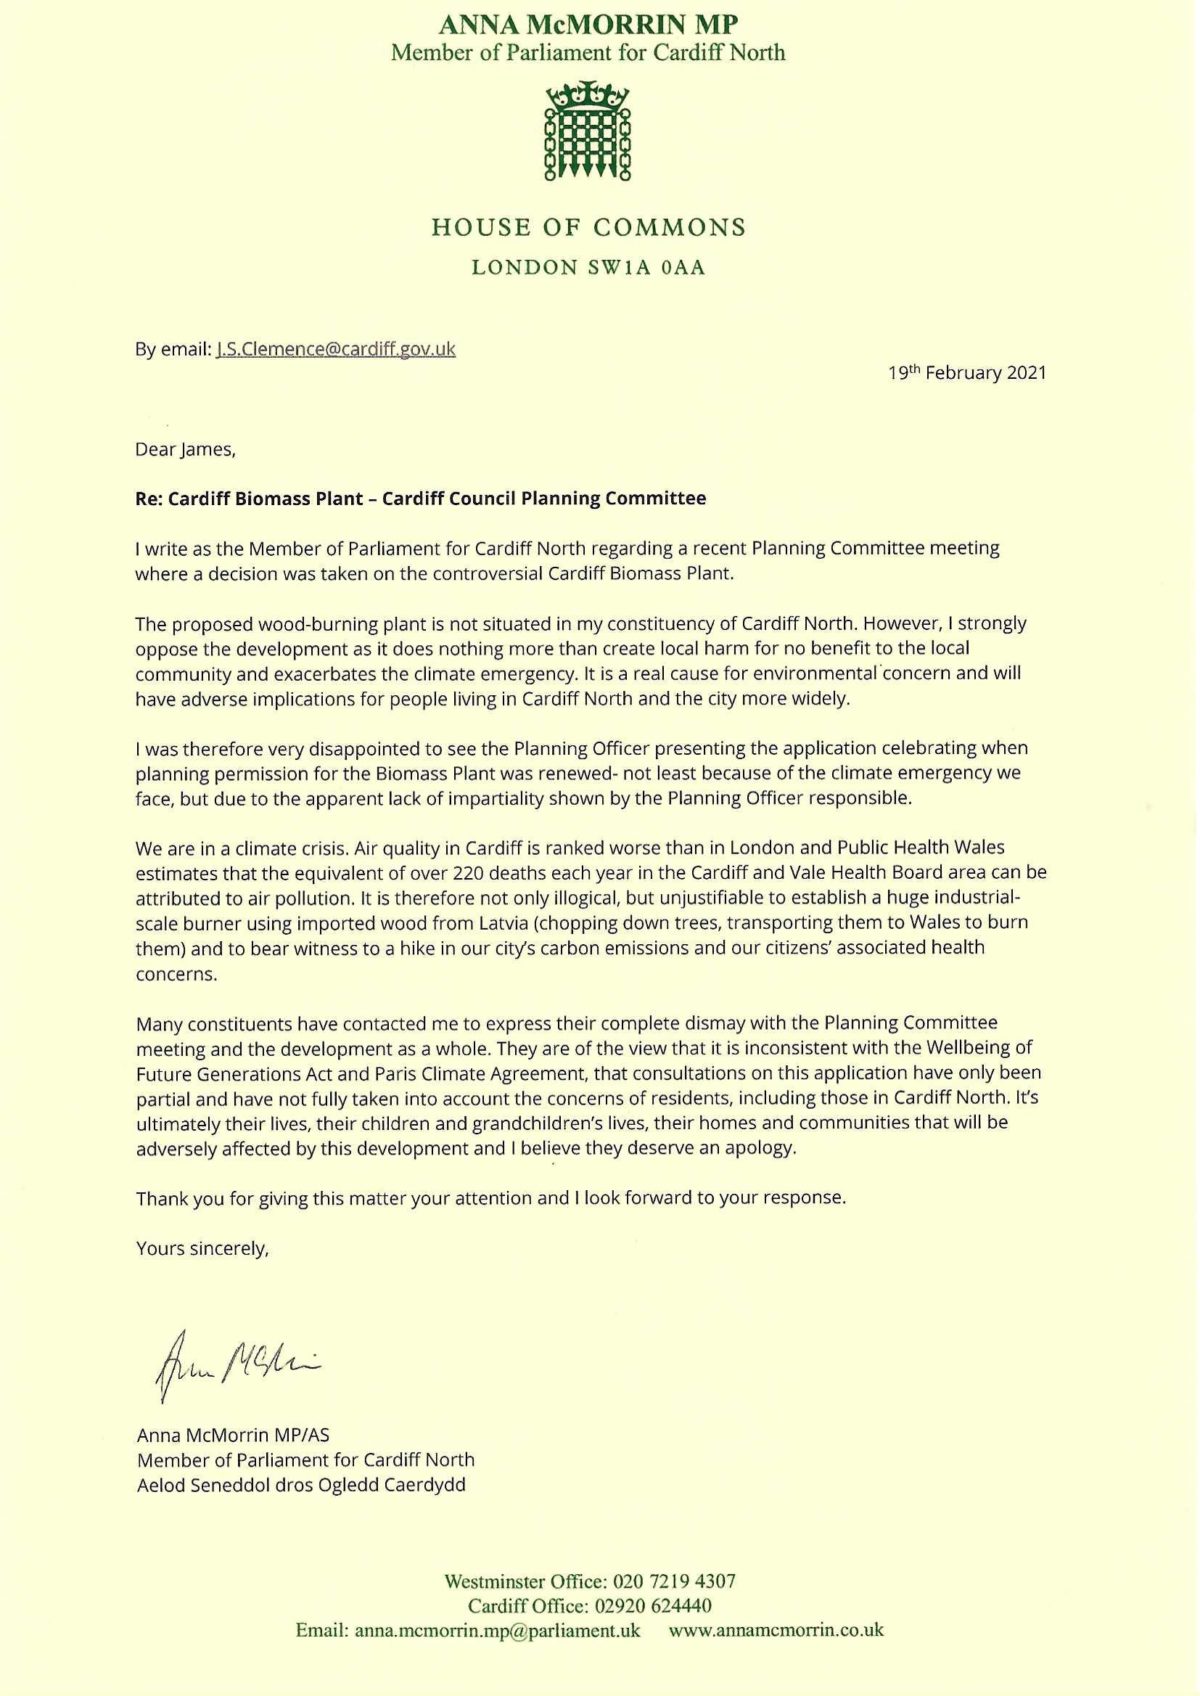 Letter to Head of Planning